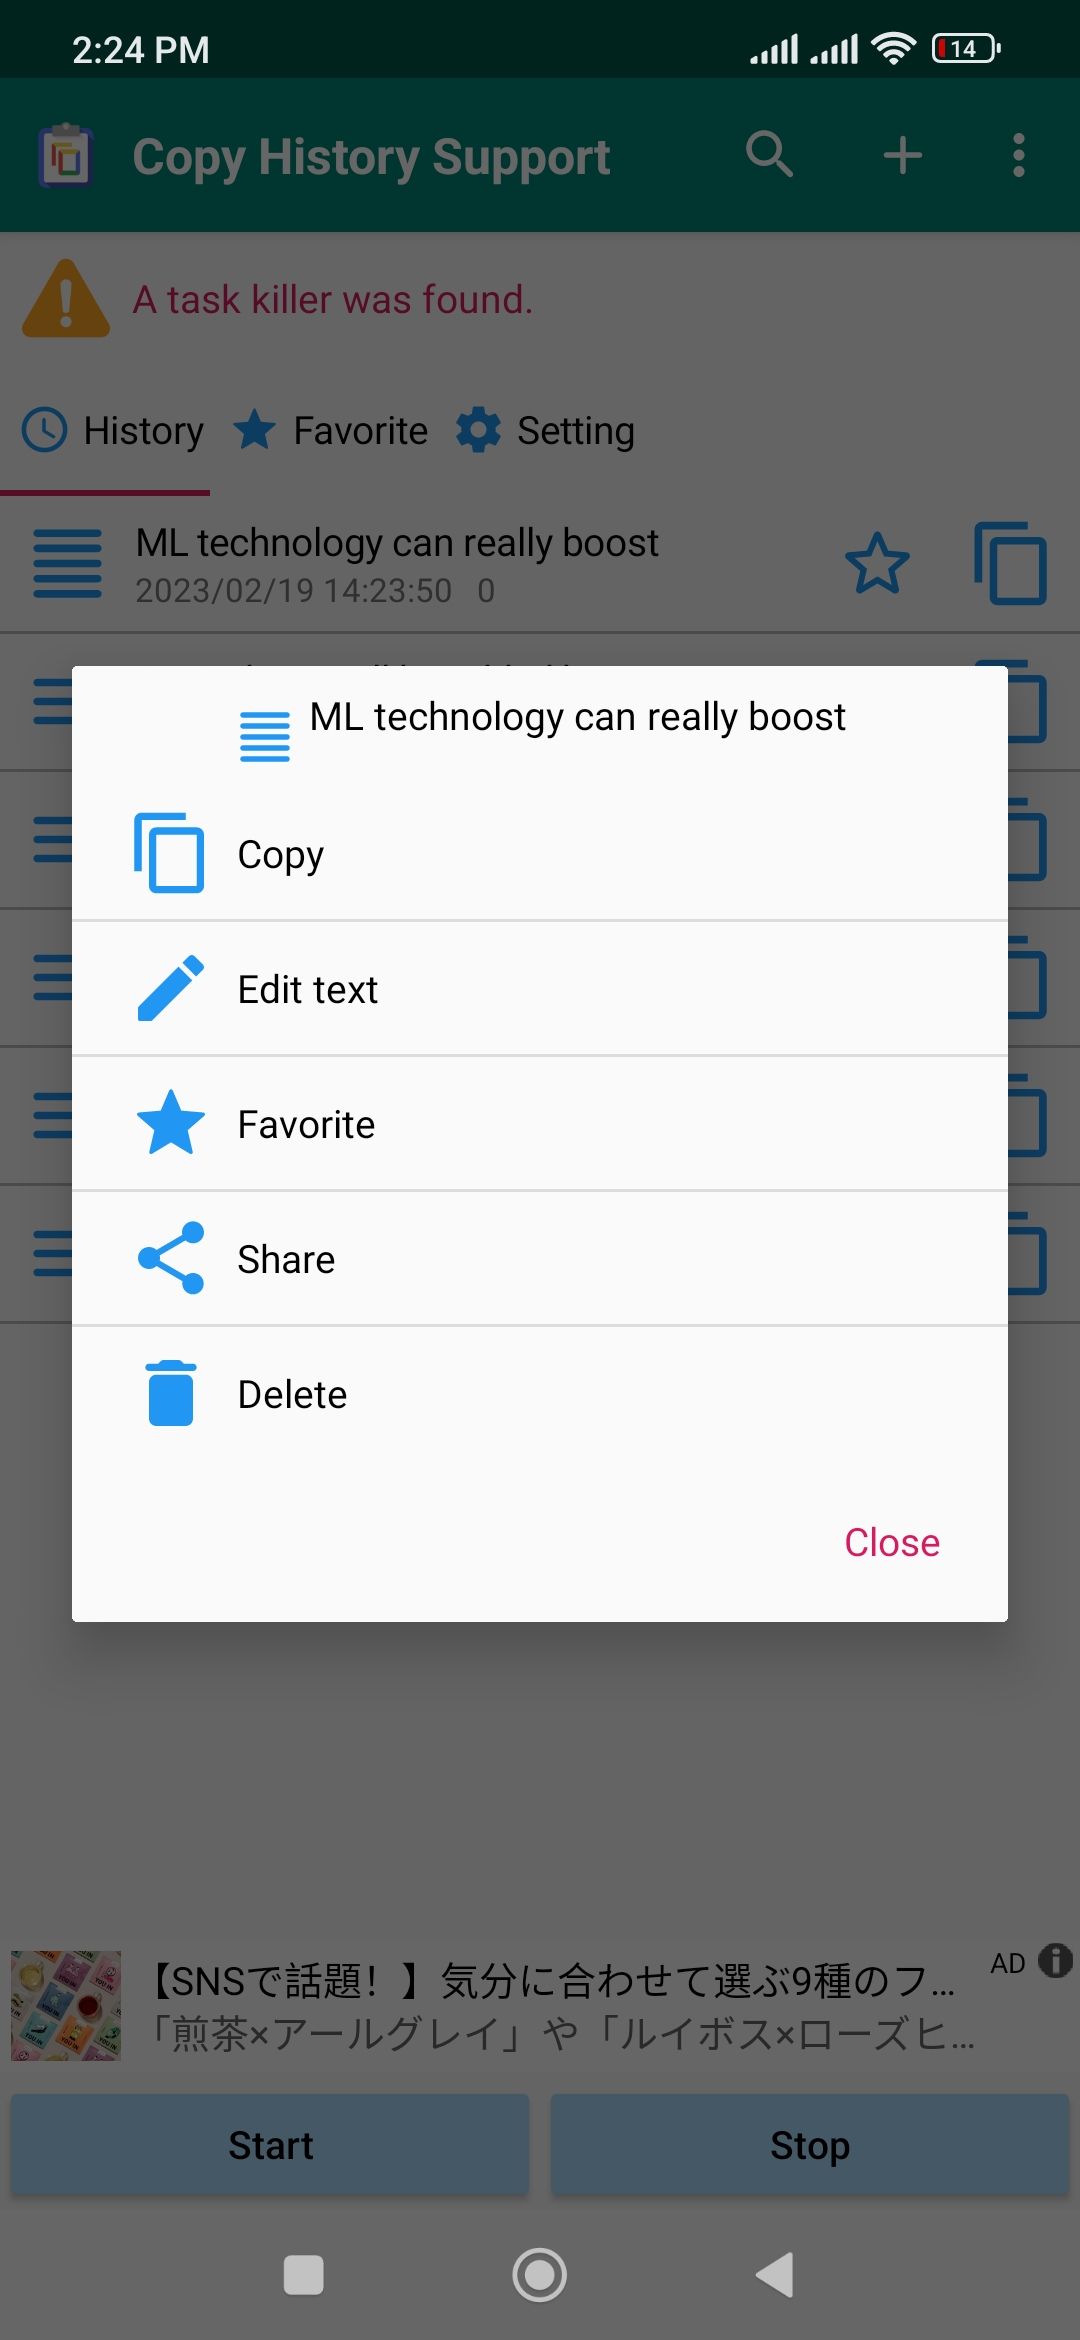 Clipboard Manager by Jetpof Apps - More Options